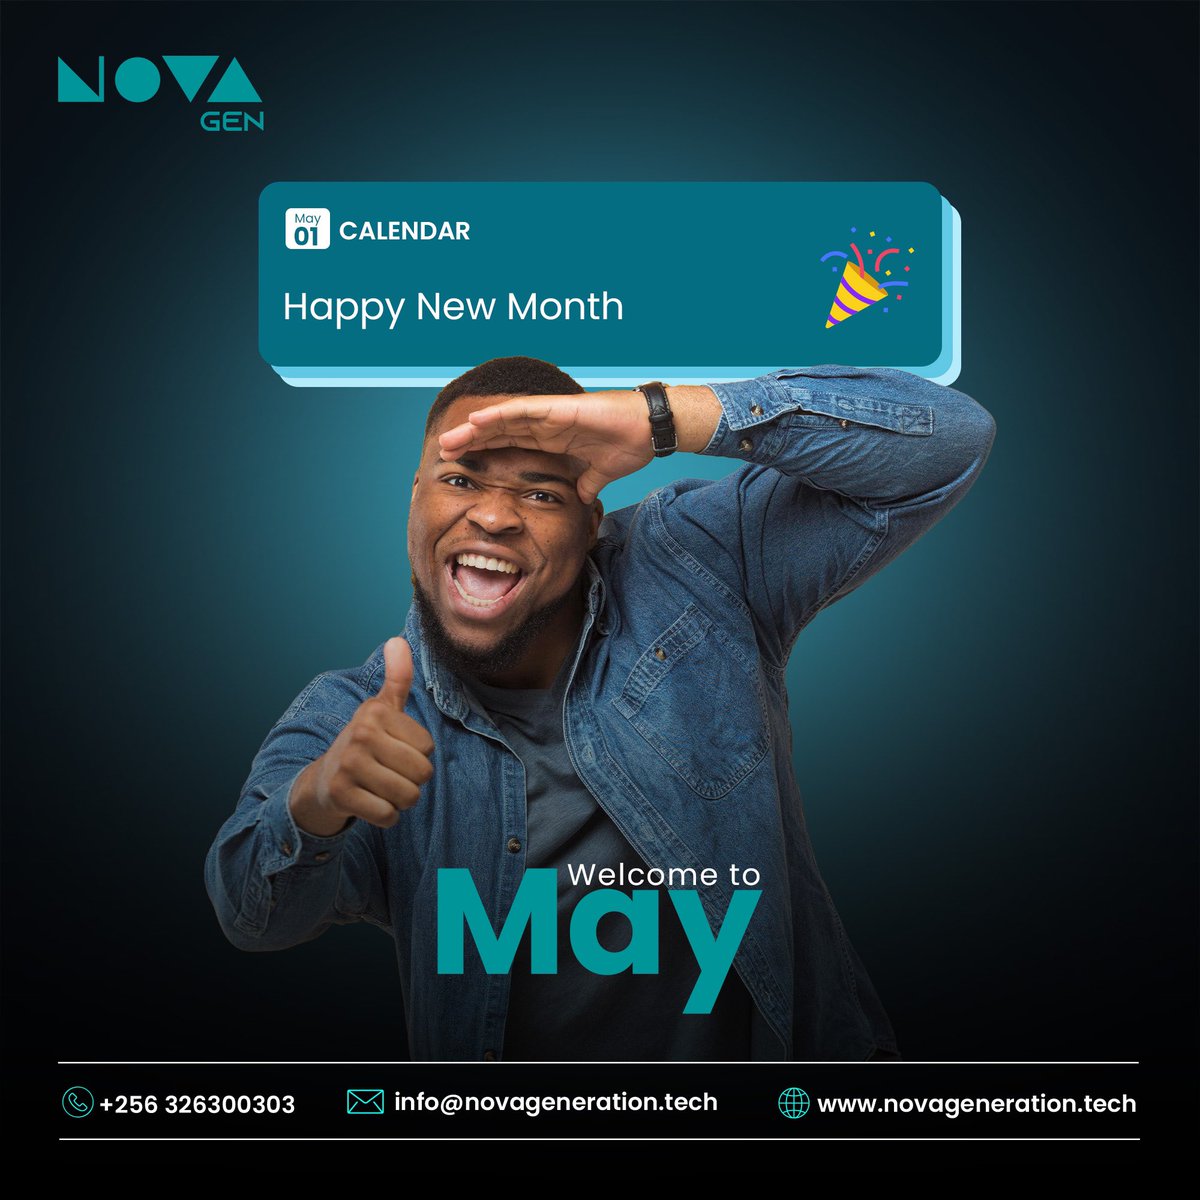 5/12. Welcome to the month of May! 

Let us make the best out of it and make it extraordinary!
#HappyNewMonth #NovaGenUG